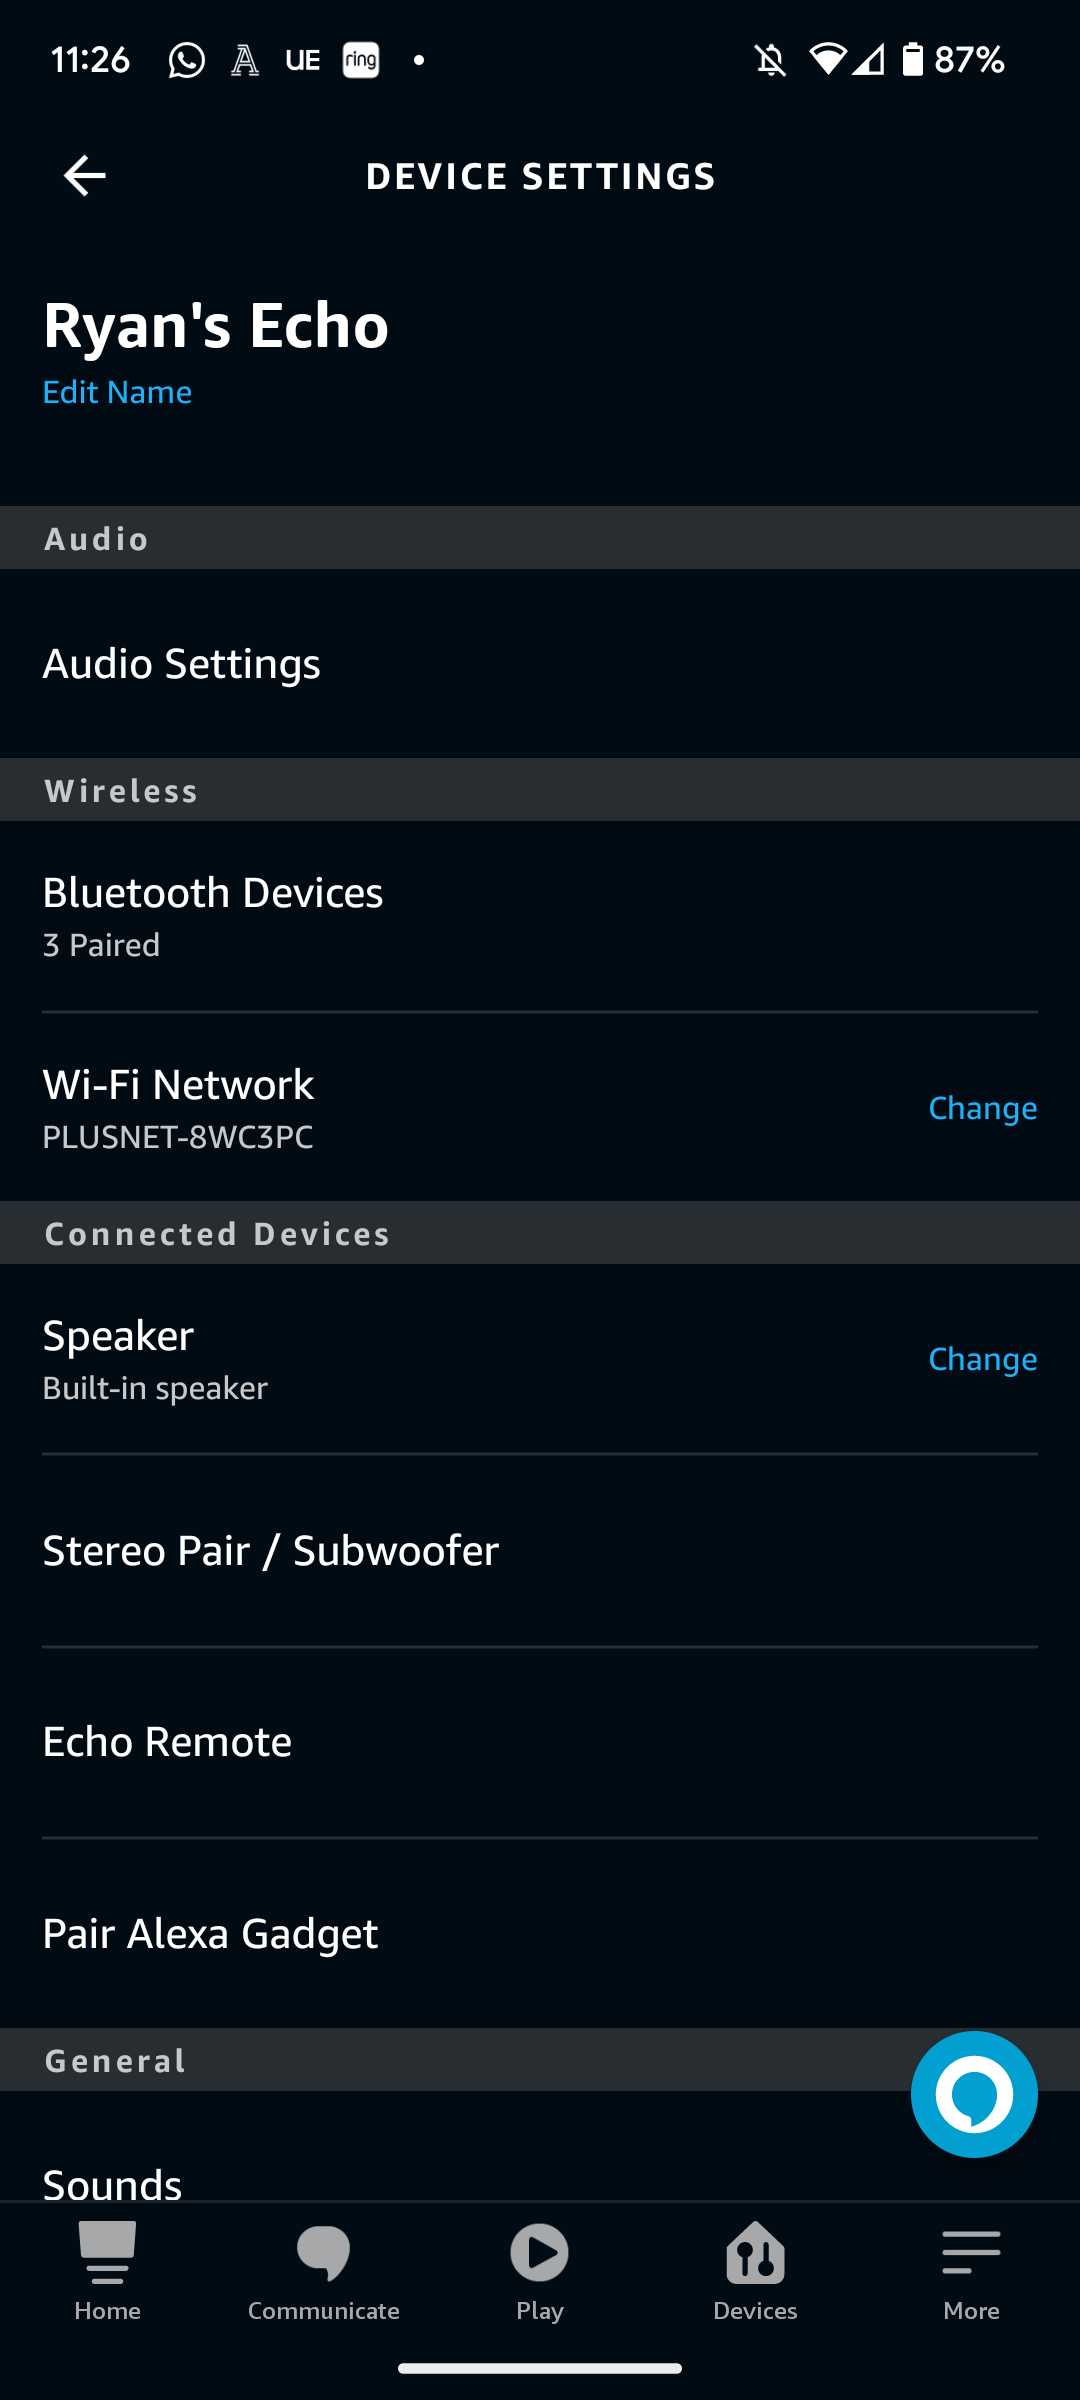 How to connect an Amazon Echo to different Wi-Fi